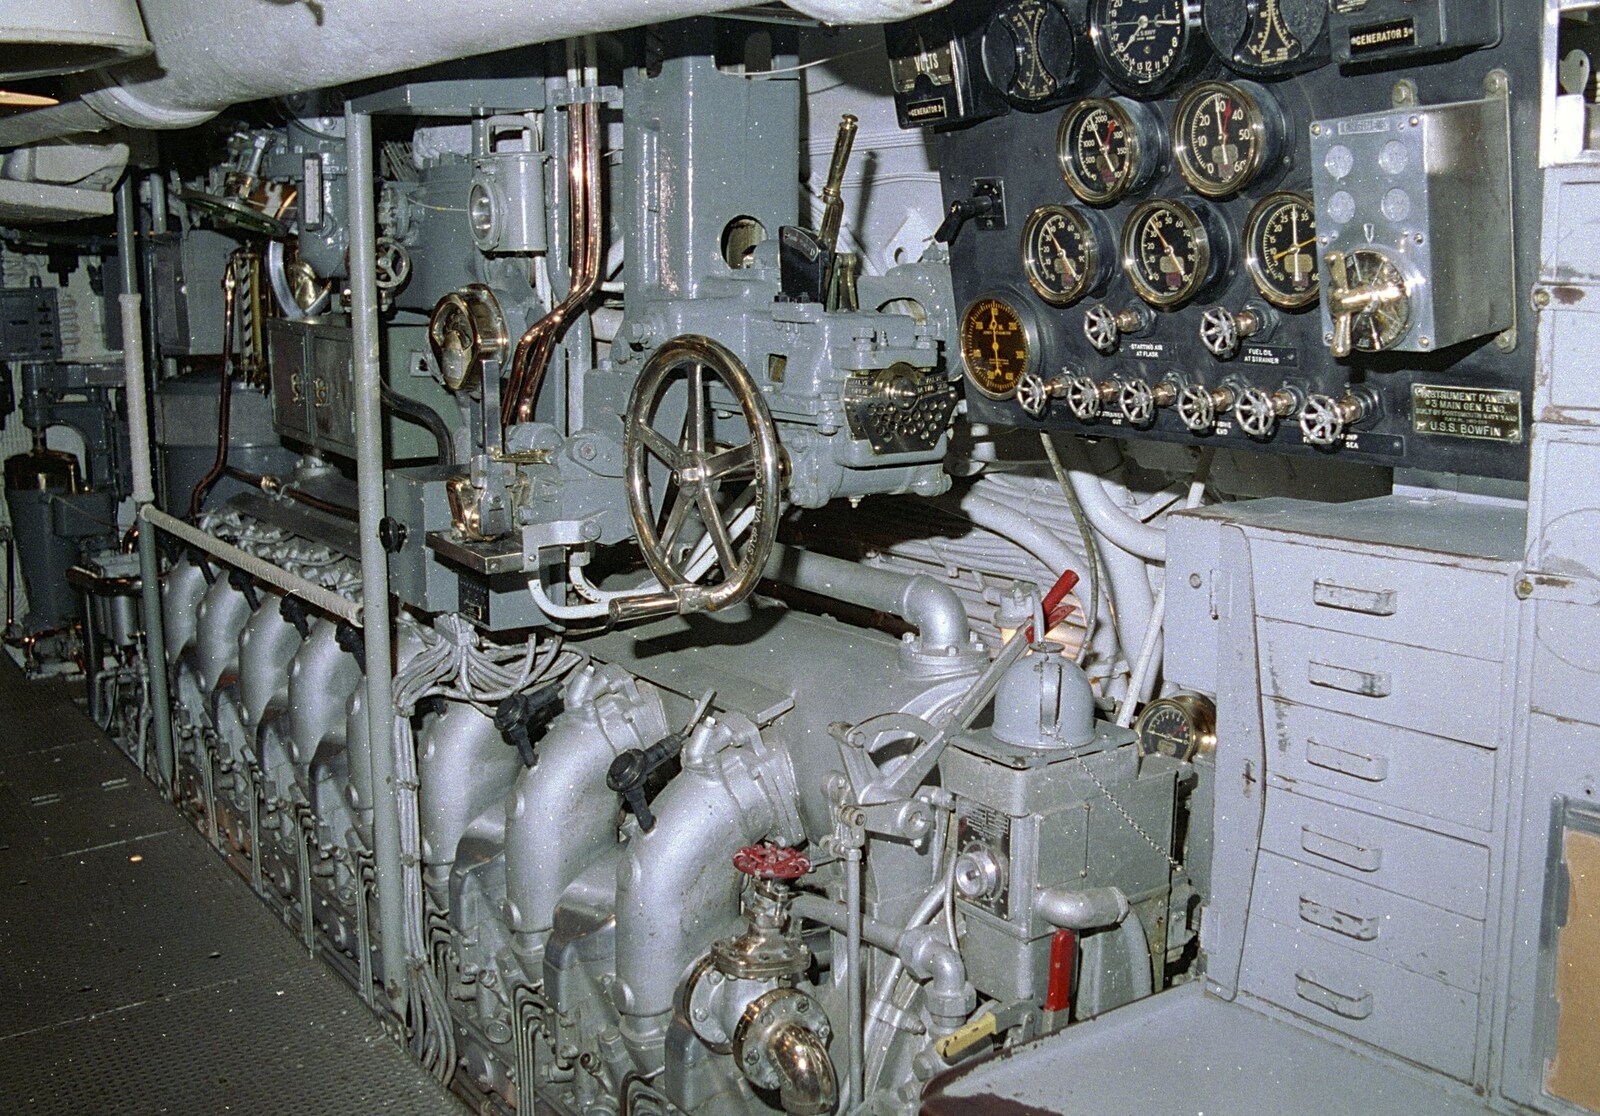 The submarine's diesel engine from A 747 Cockpit, Honolulu and Pearl Harbor, O'ahu, Hawai'i, United States - 20th November 1992